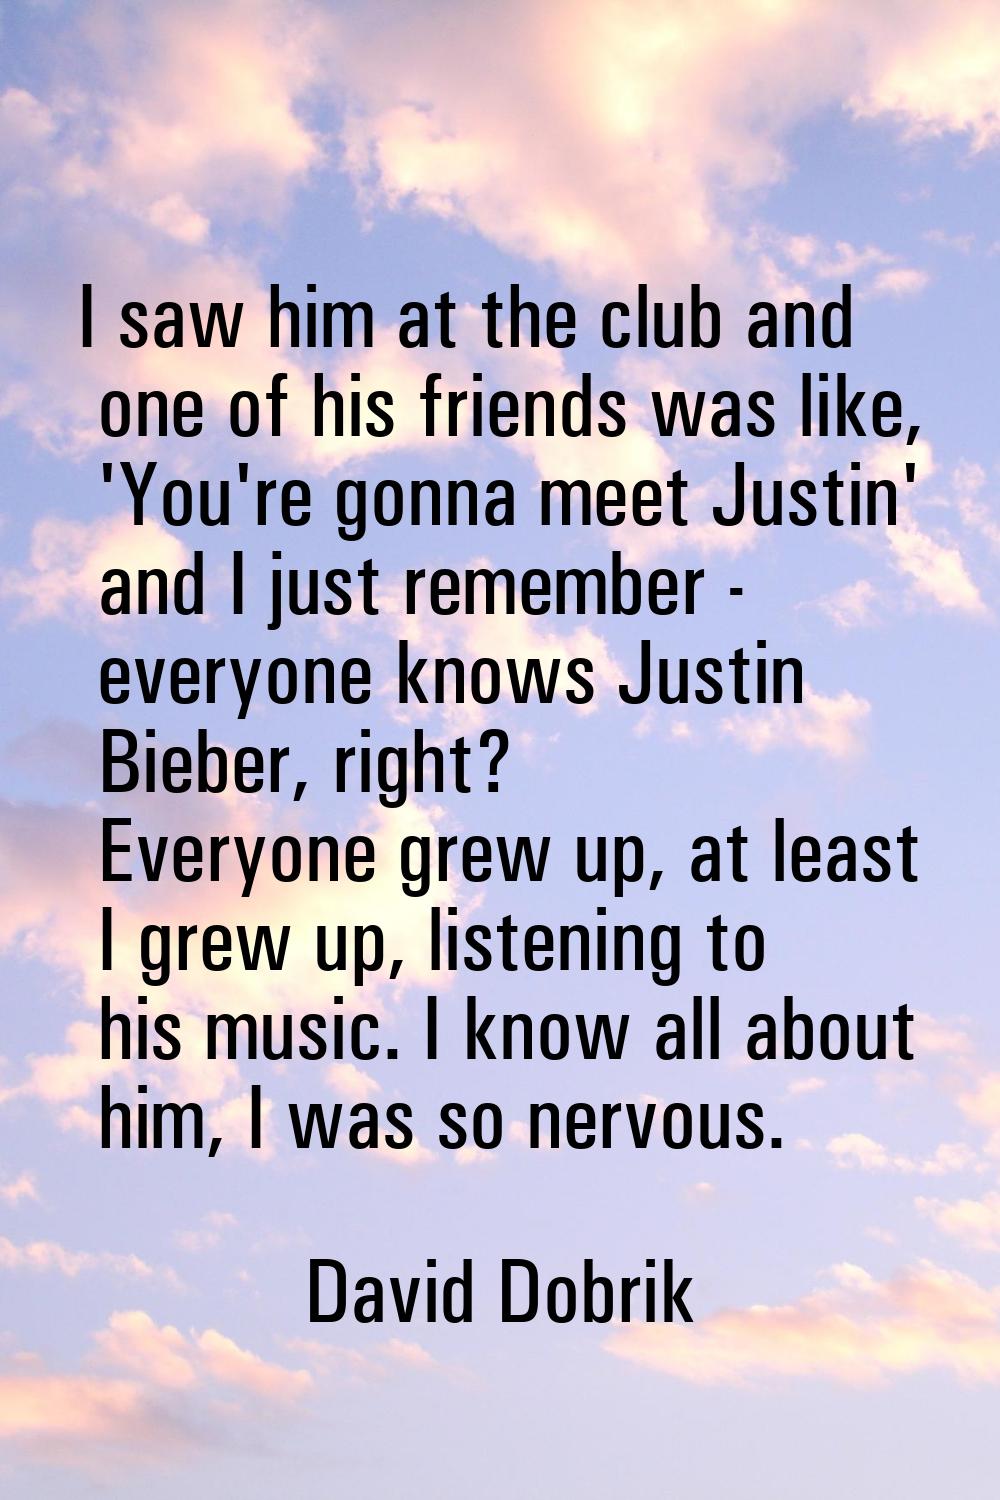 I saw him at the club and one of his friends was like, 'You're gonna meet Justin' and I just rememb